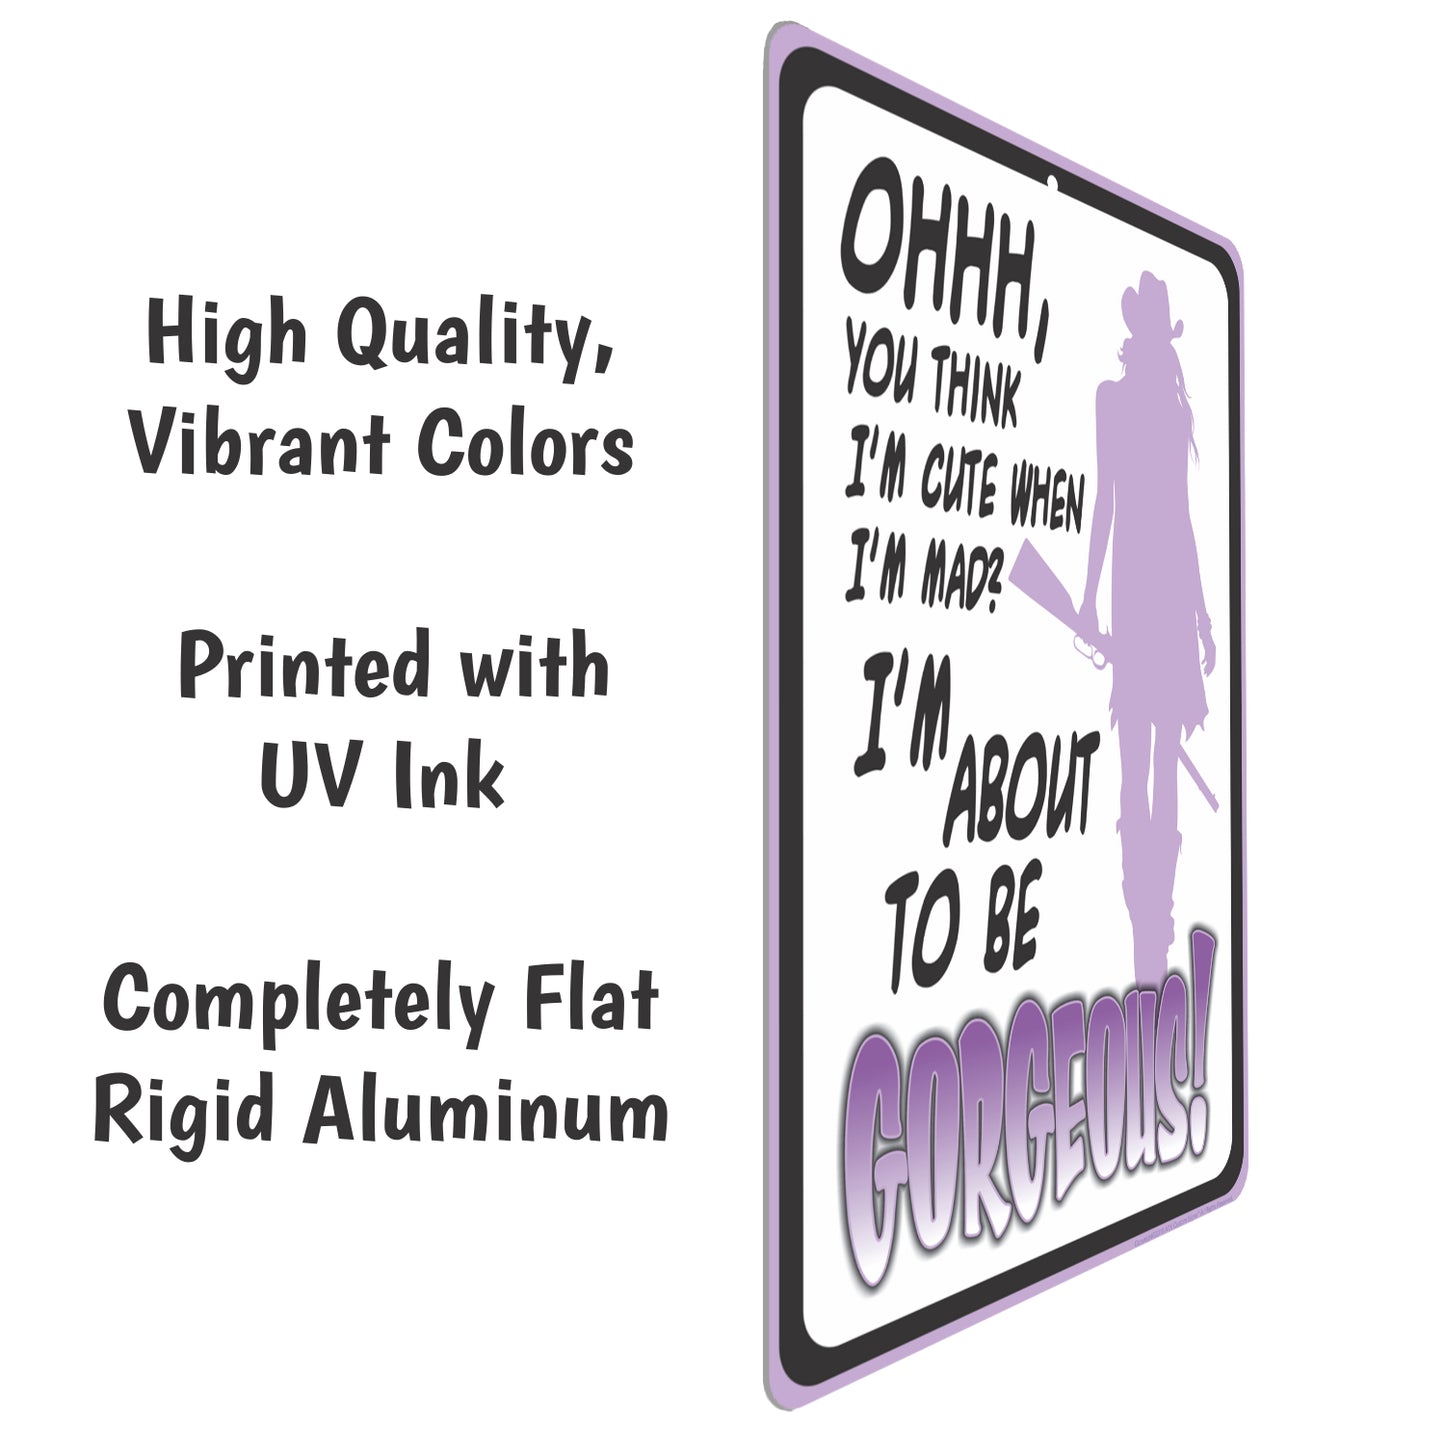 Funny Metal Warning Sign for Bars - Ohhh, You Think I'm Cute When Im mad? I'm About to be Gorgeous! (Purple) - Size 8 x 12